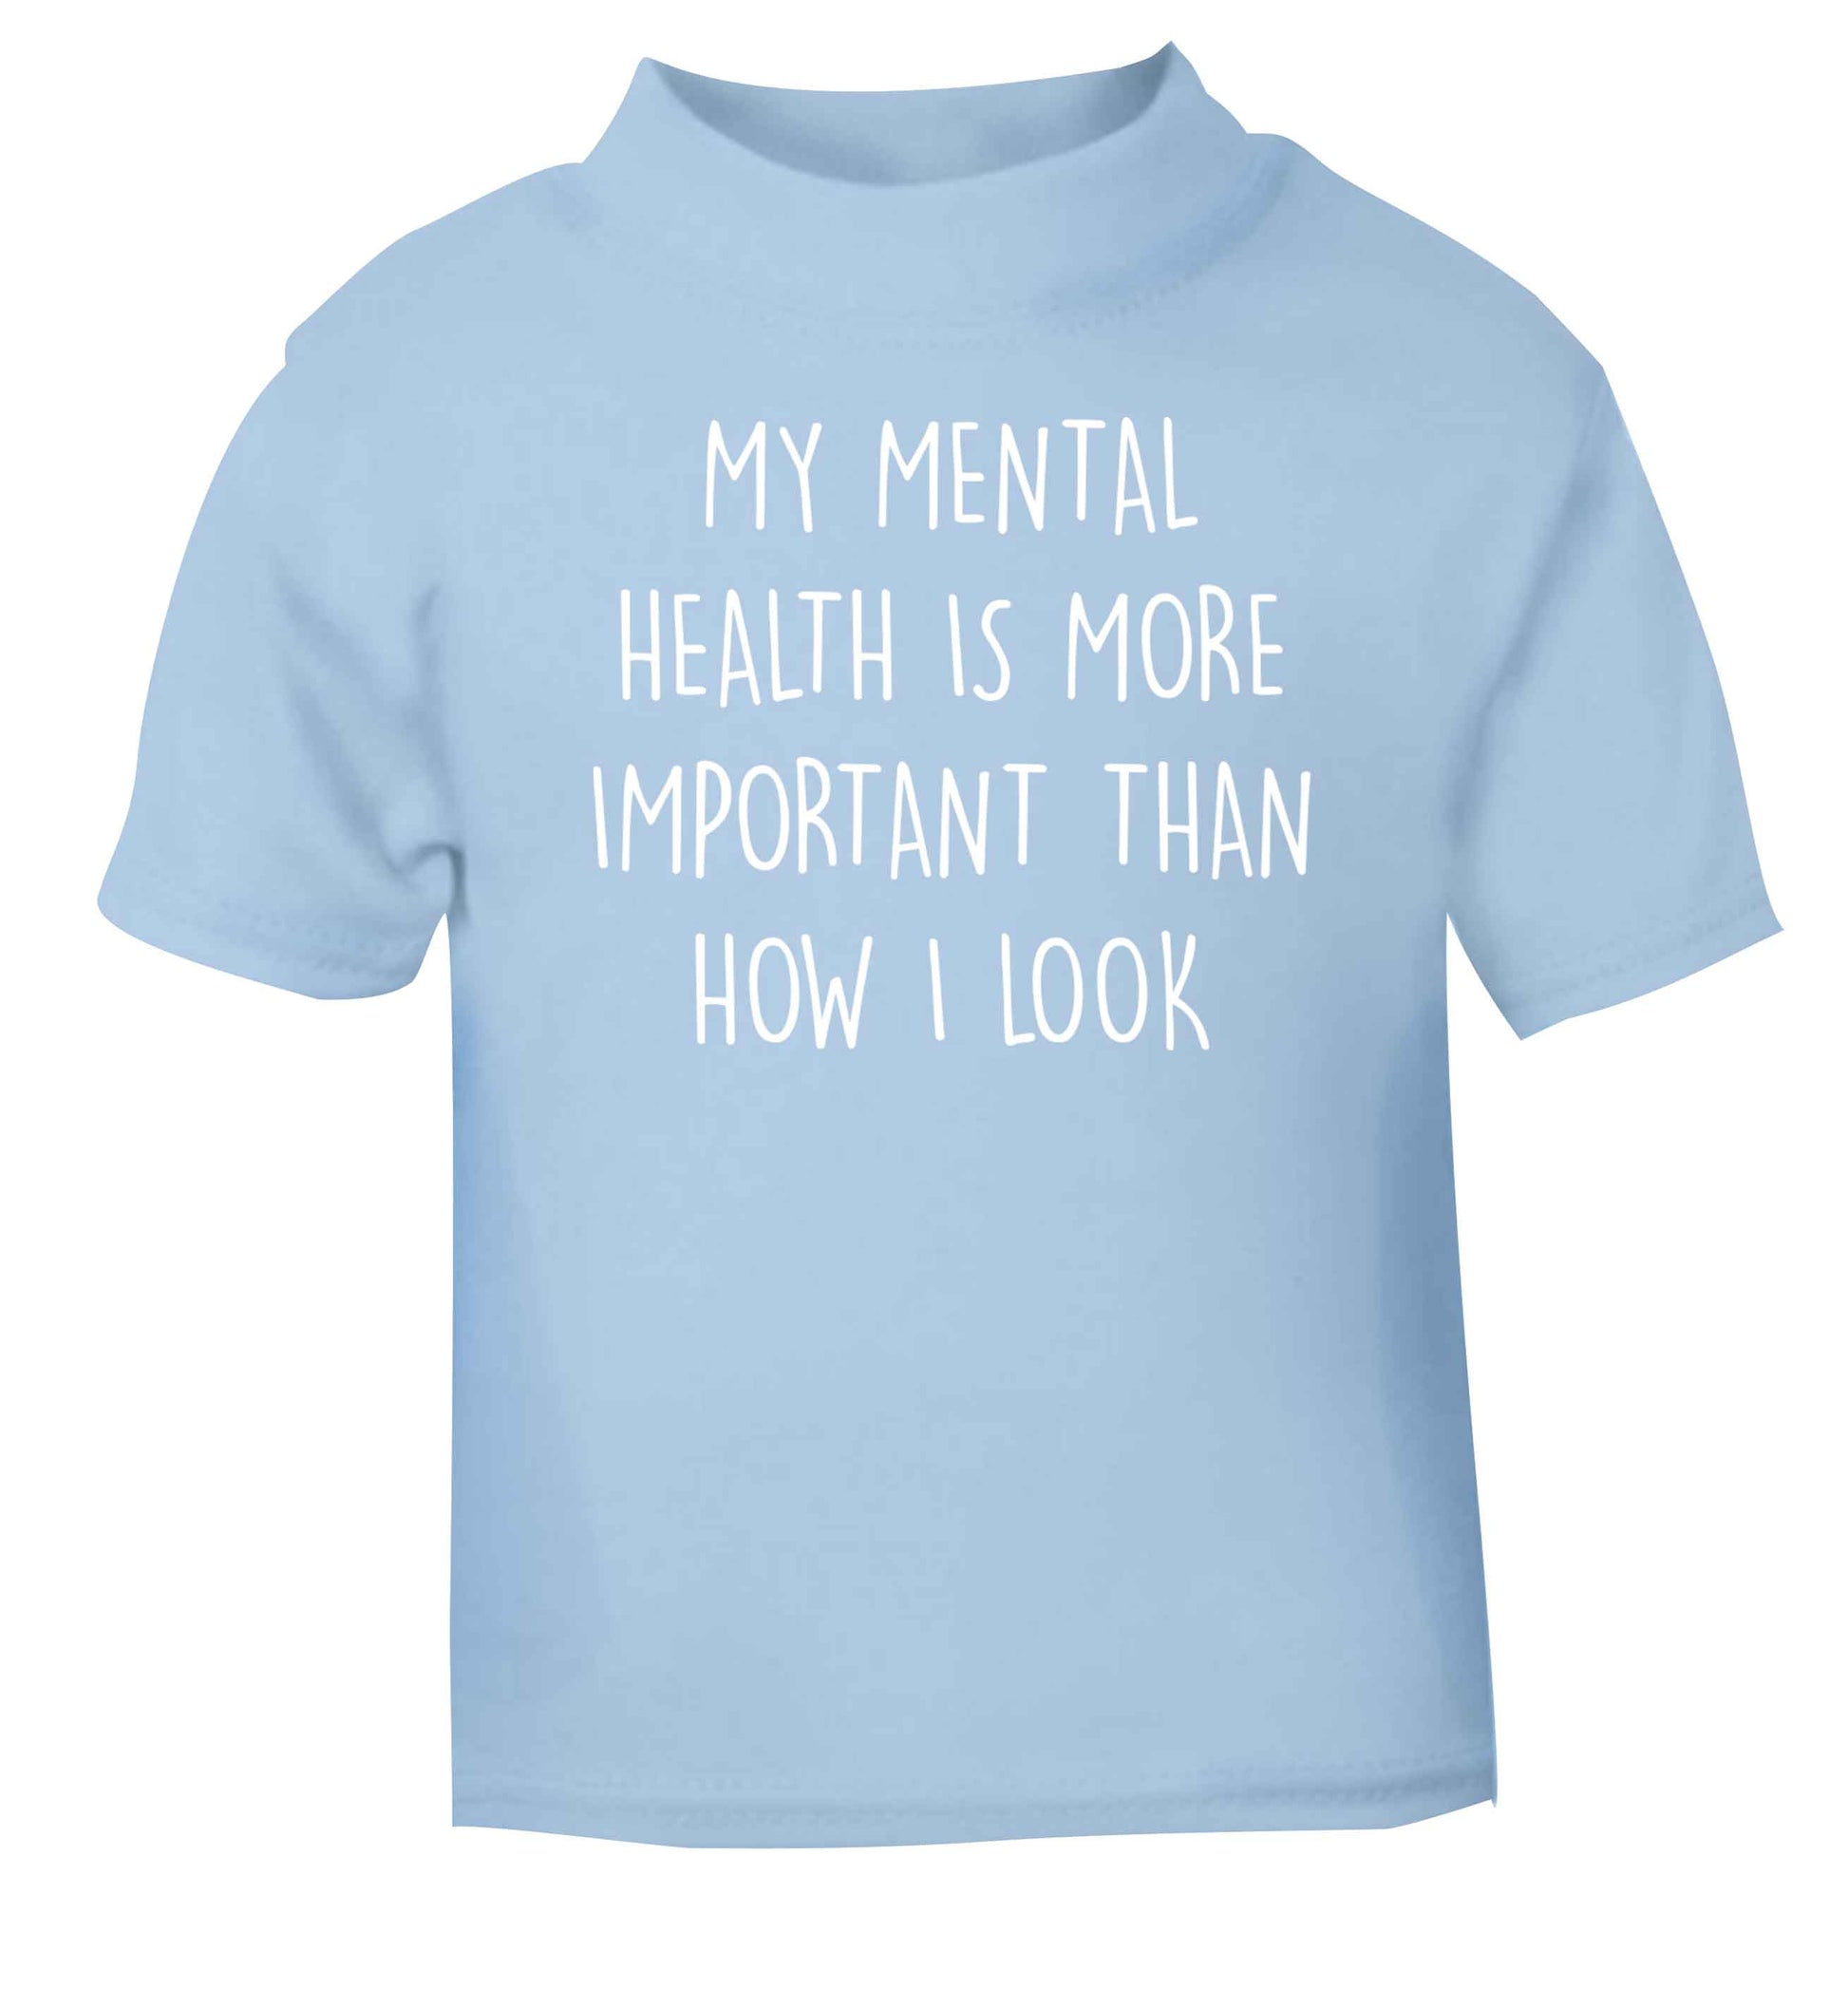 My mental health is more importnat than how I look light blue baby toddler Tshirt 2 Years